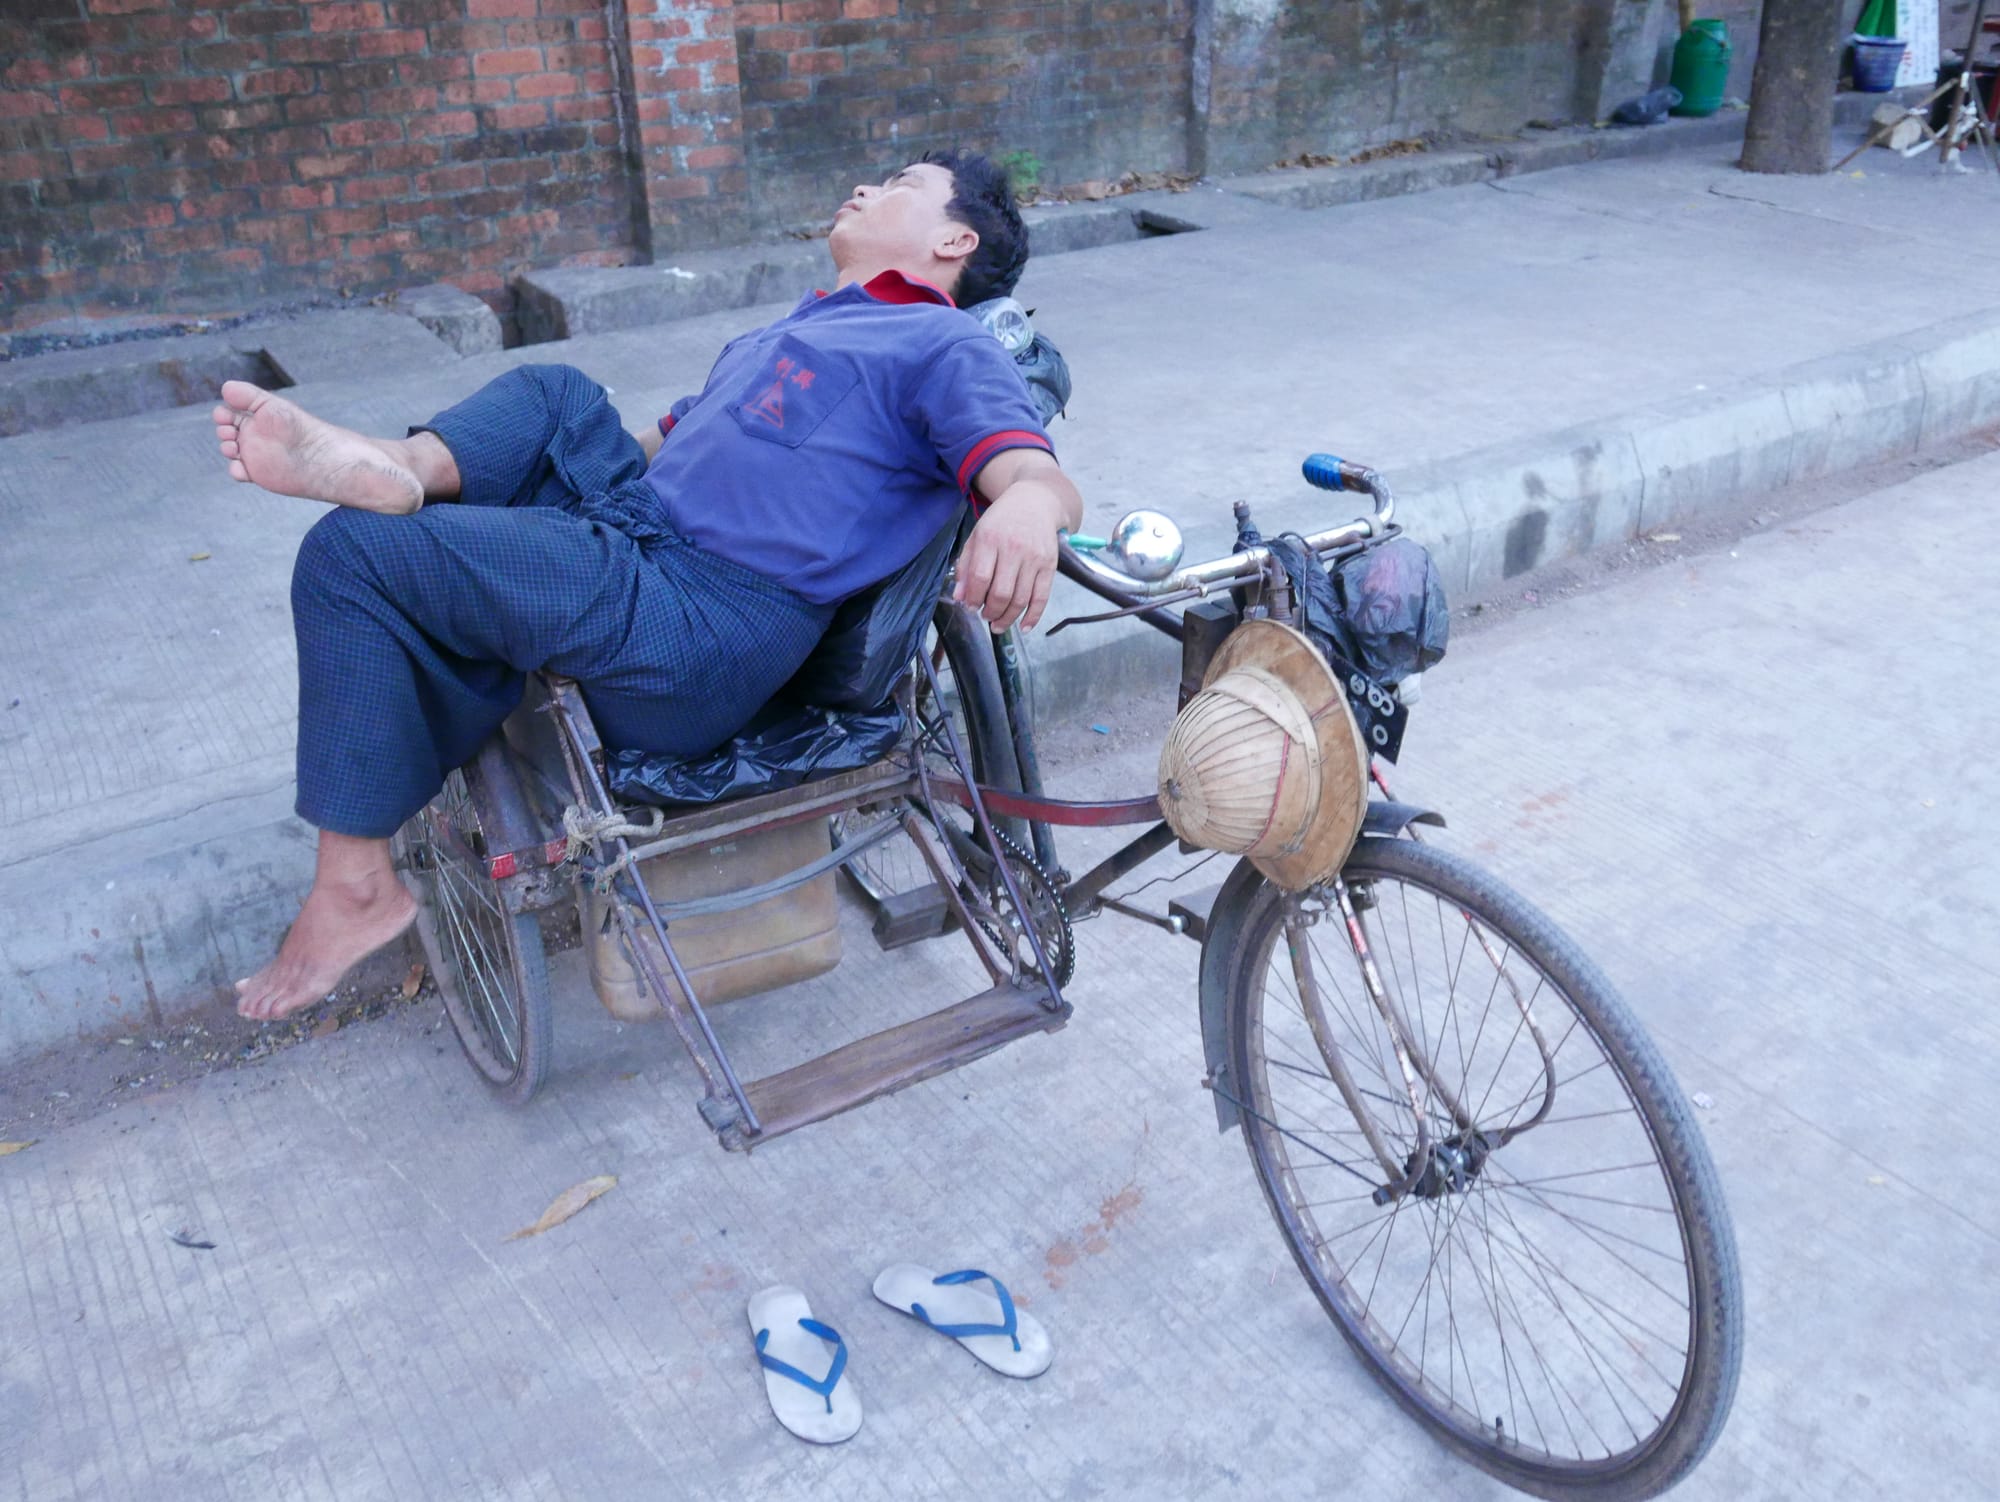 Photo by Author — bike taxi driver napping — Myanmar (Burma)